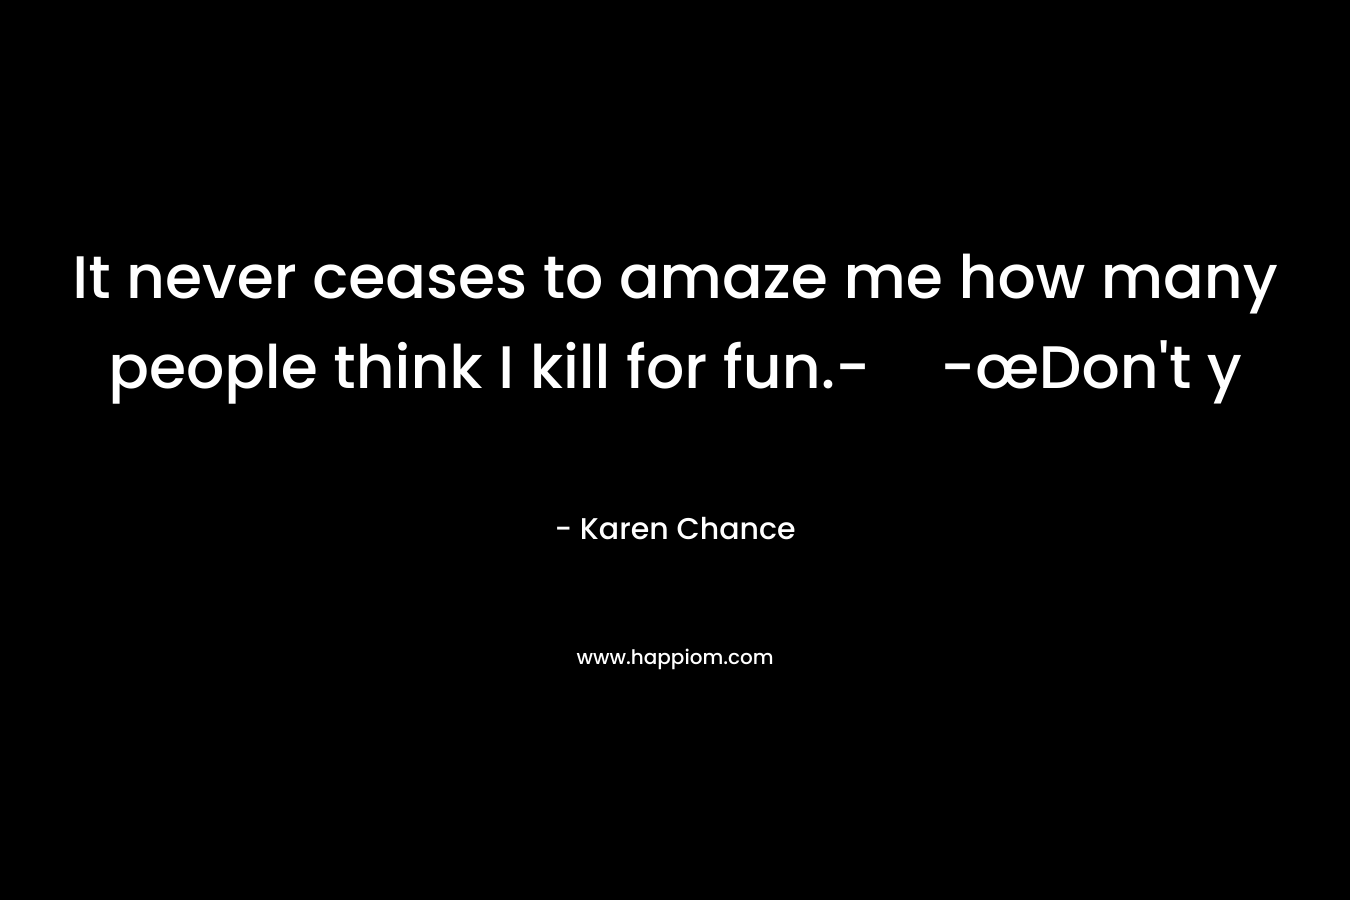 It never ceases to amaze me how many people think I kill for fun.--œDon’t y – Karen Chance